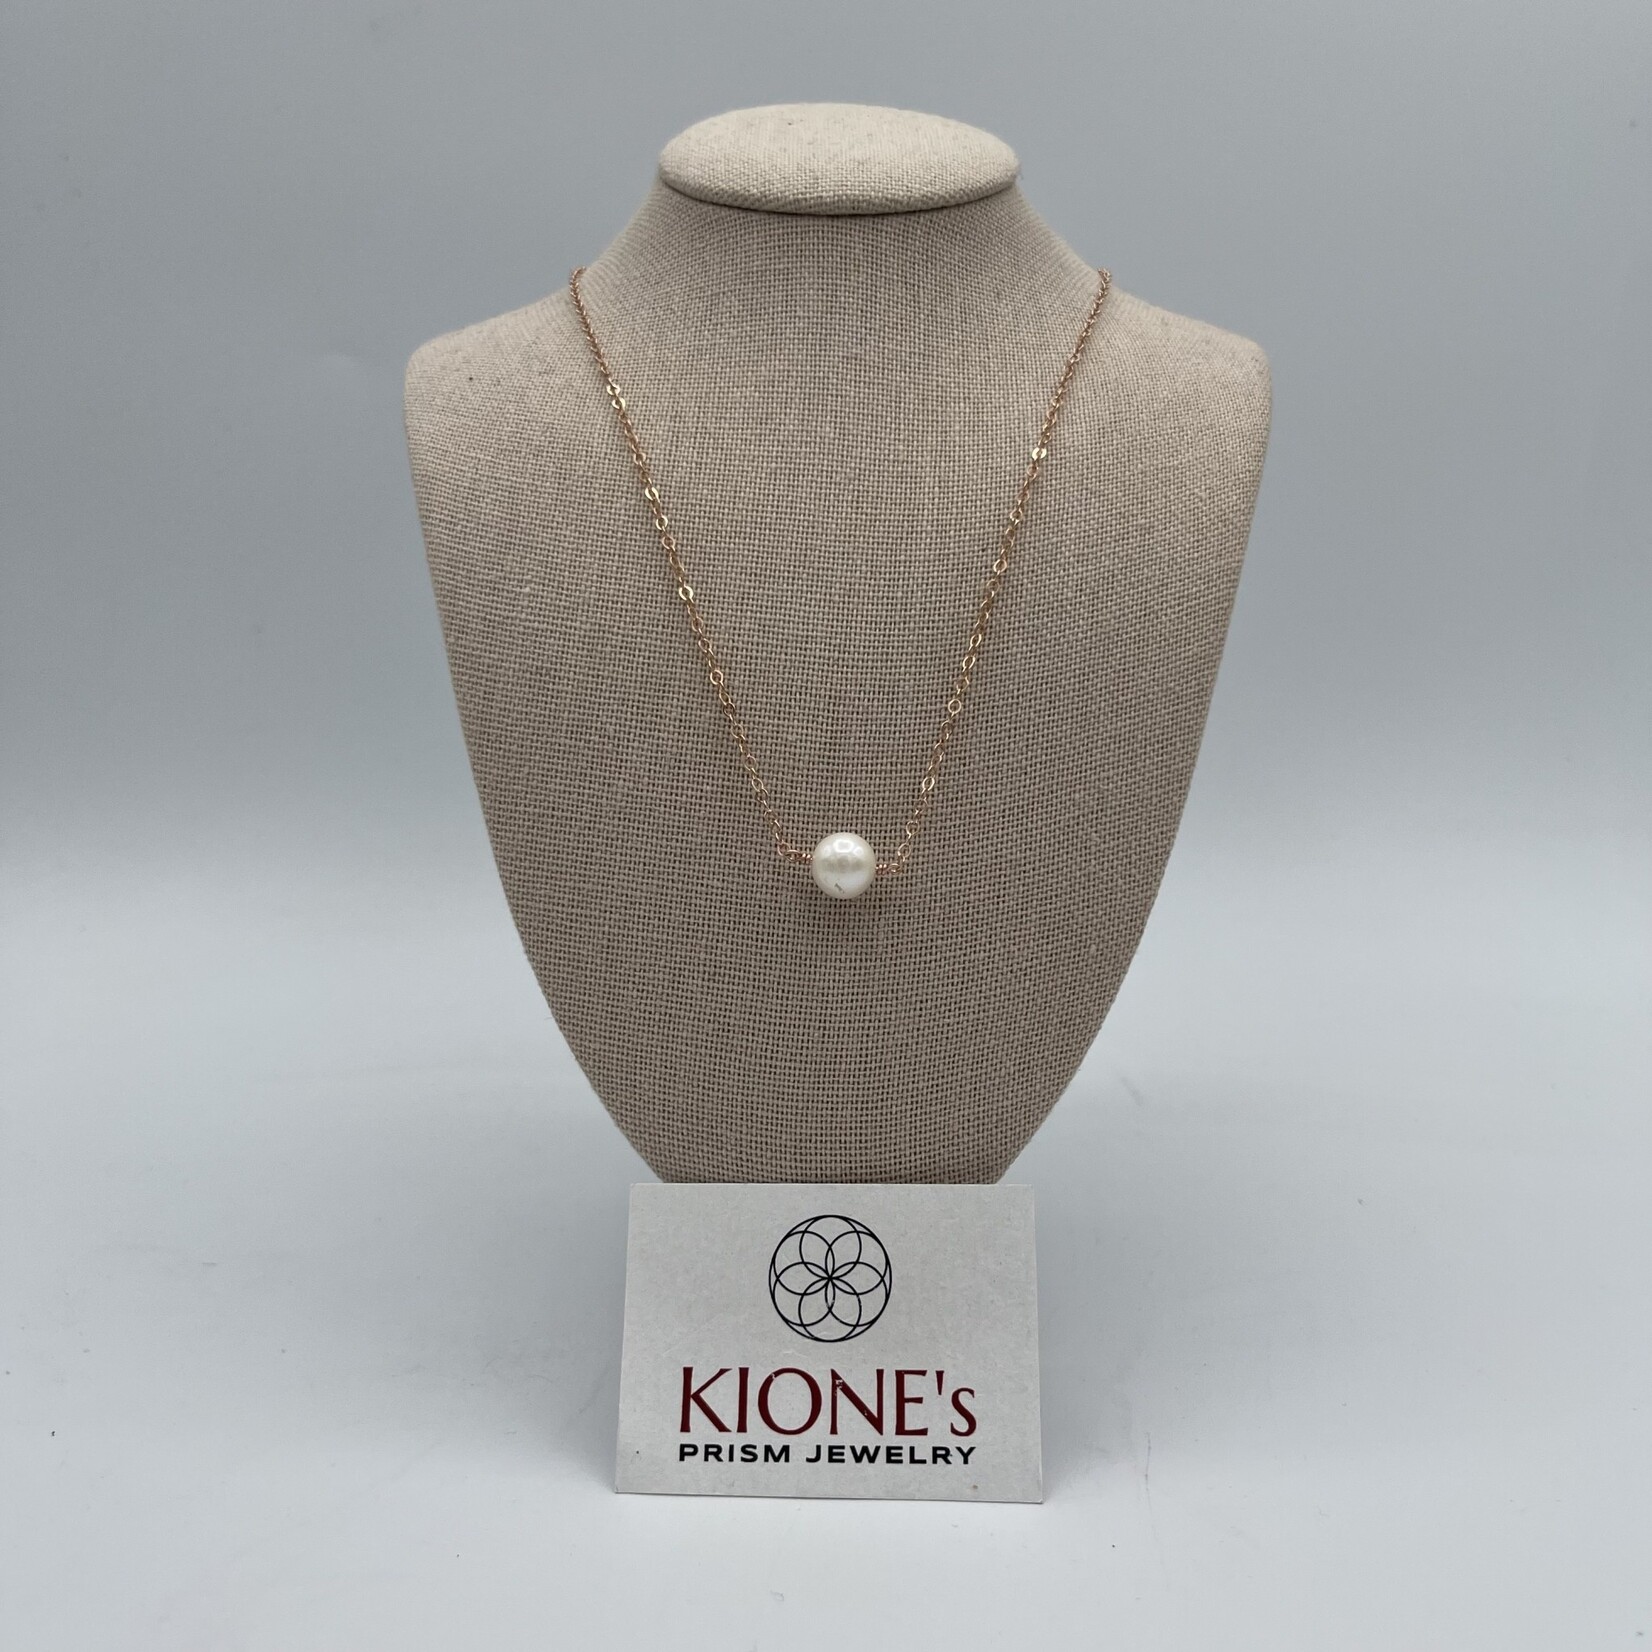 Kione’s Prism Jewelry Freshwater Pearl & 14kt Rose GF Necklace